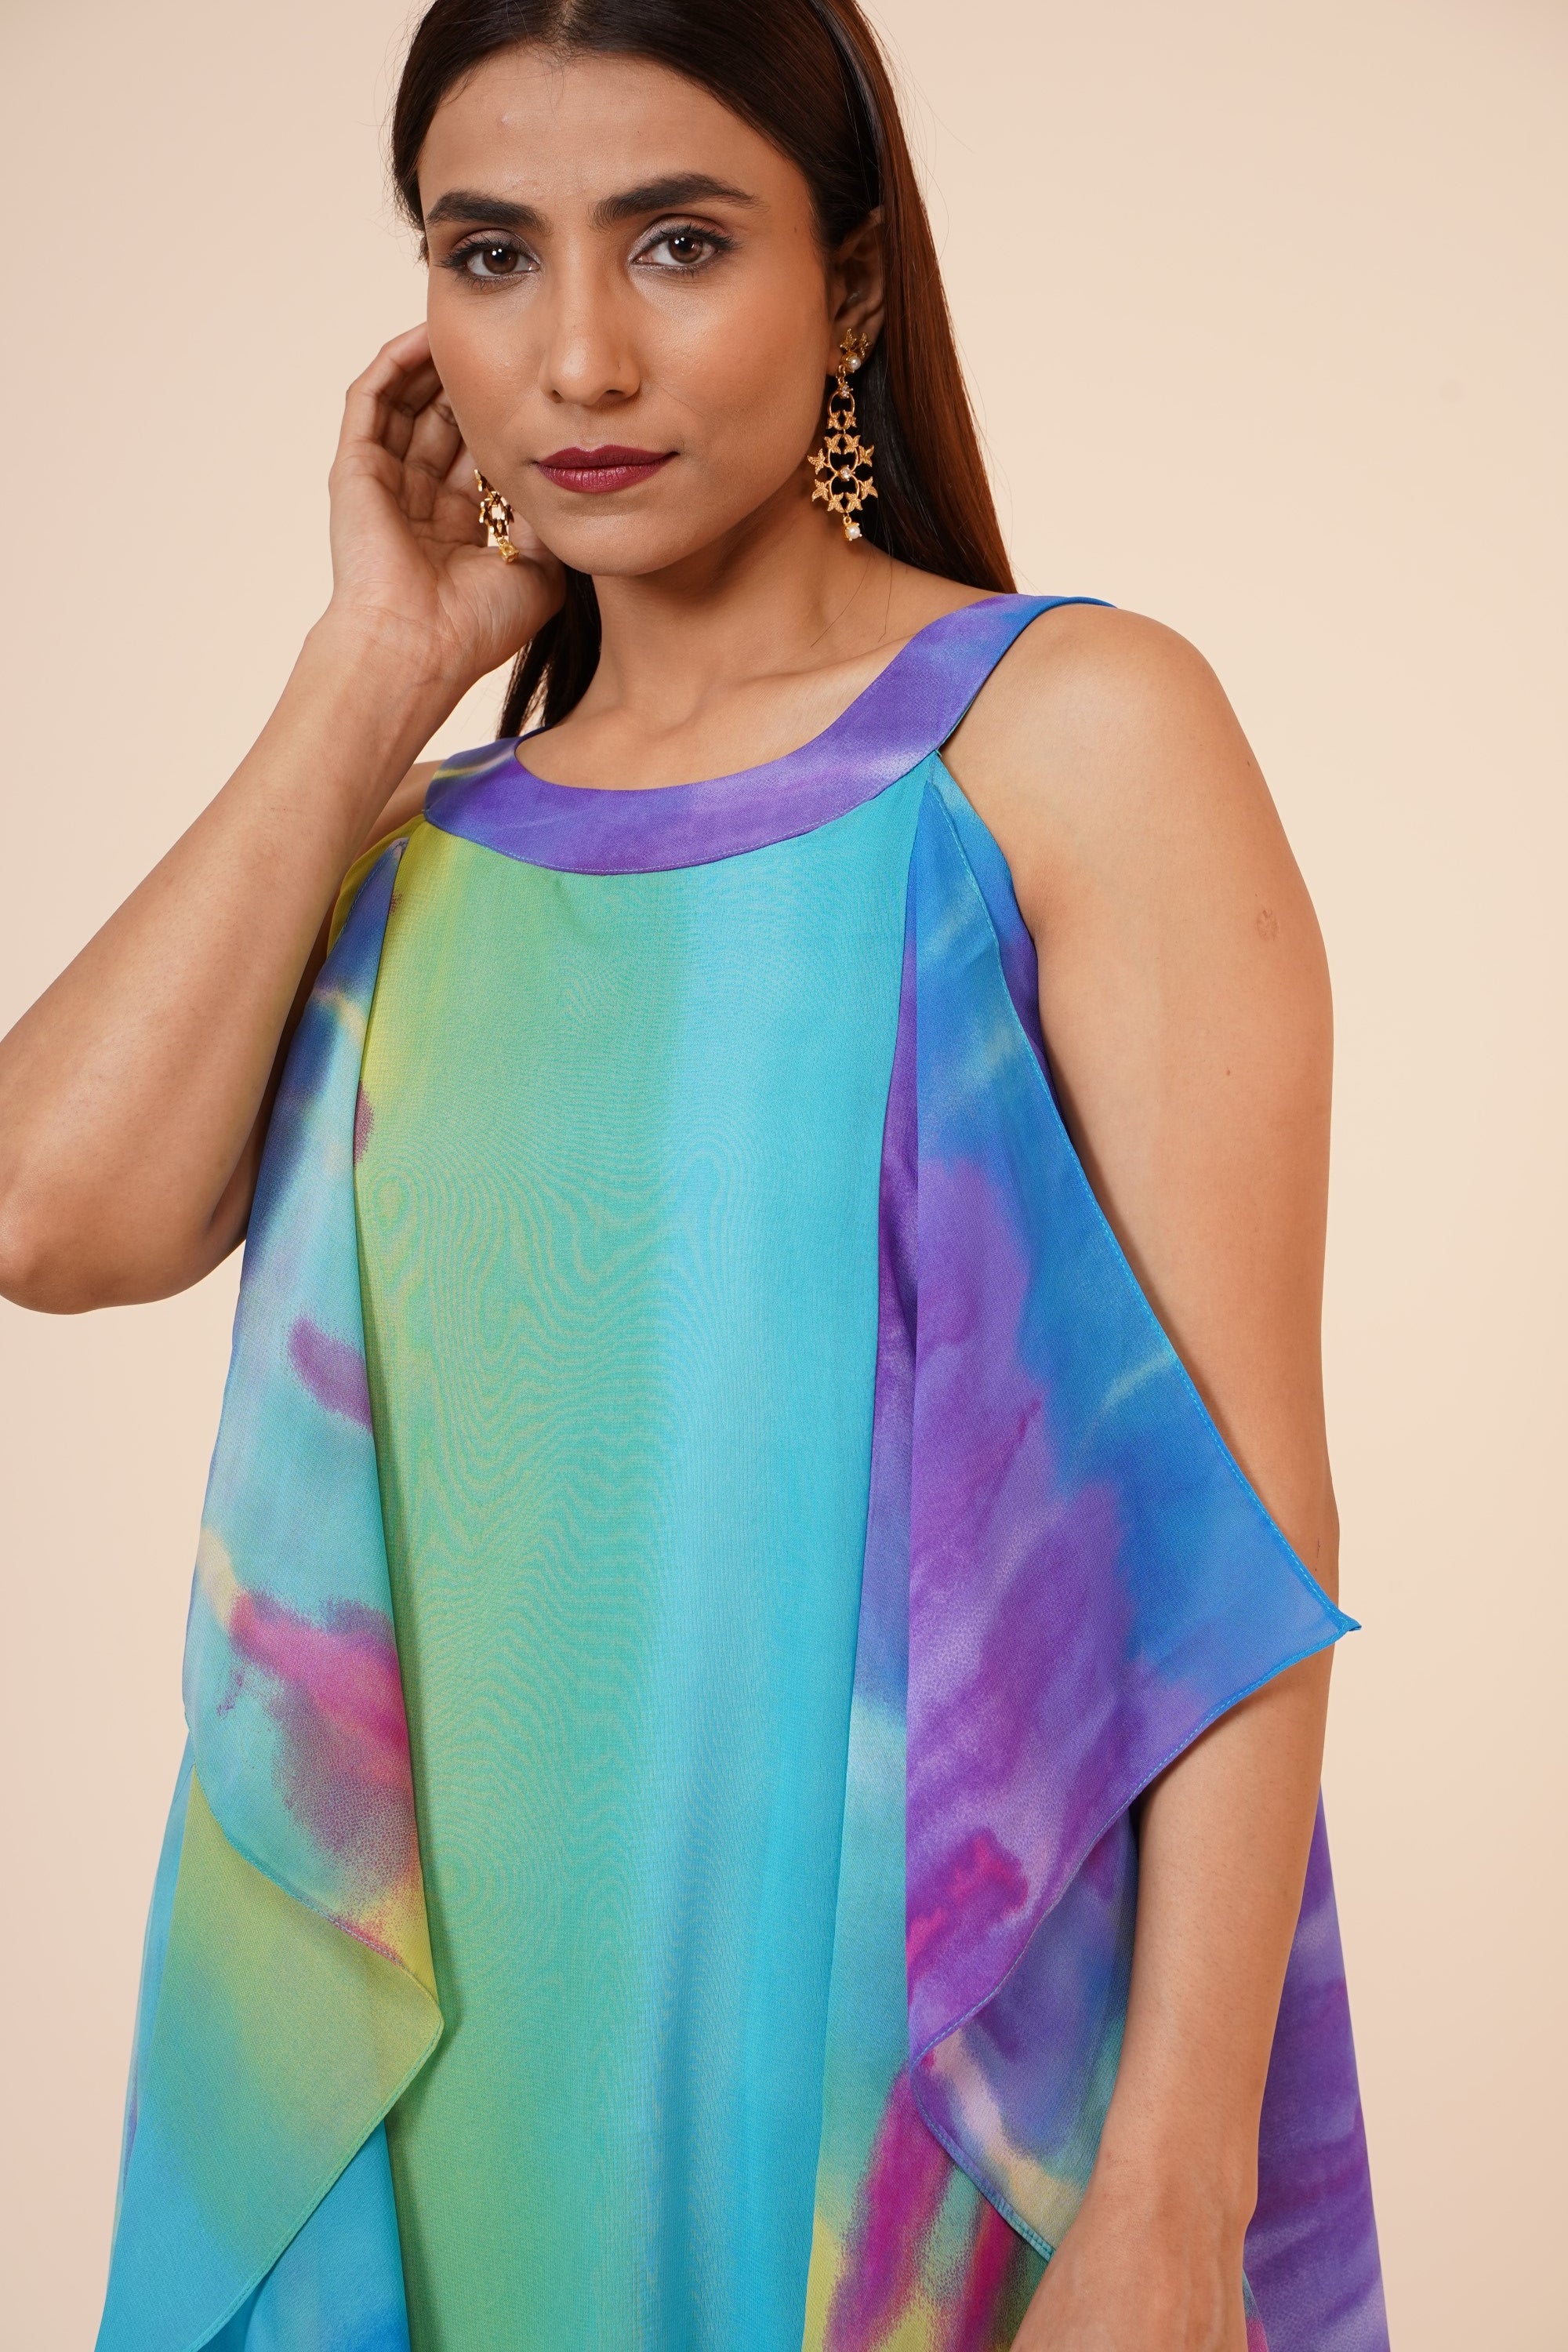 Women's Halter Neck Ruffle Drape Printed Georgette  Dress In Multicolor - MIRACOLOS by Ruchi